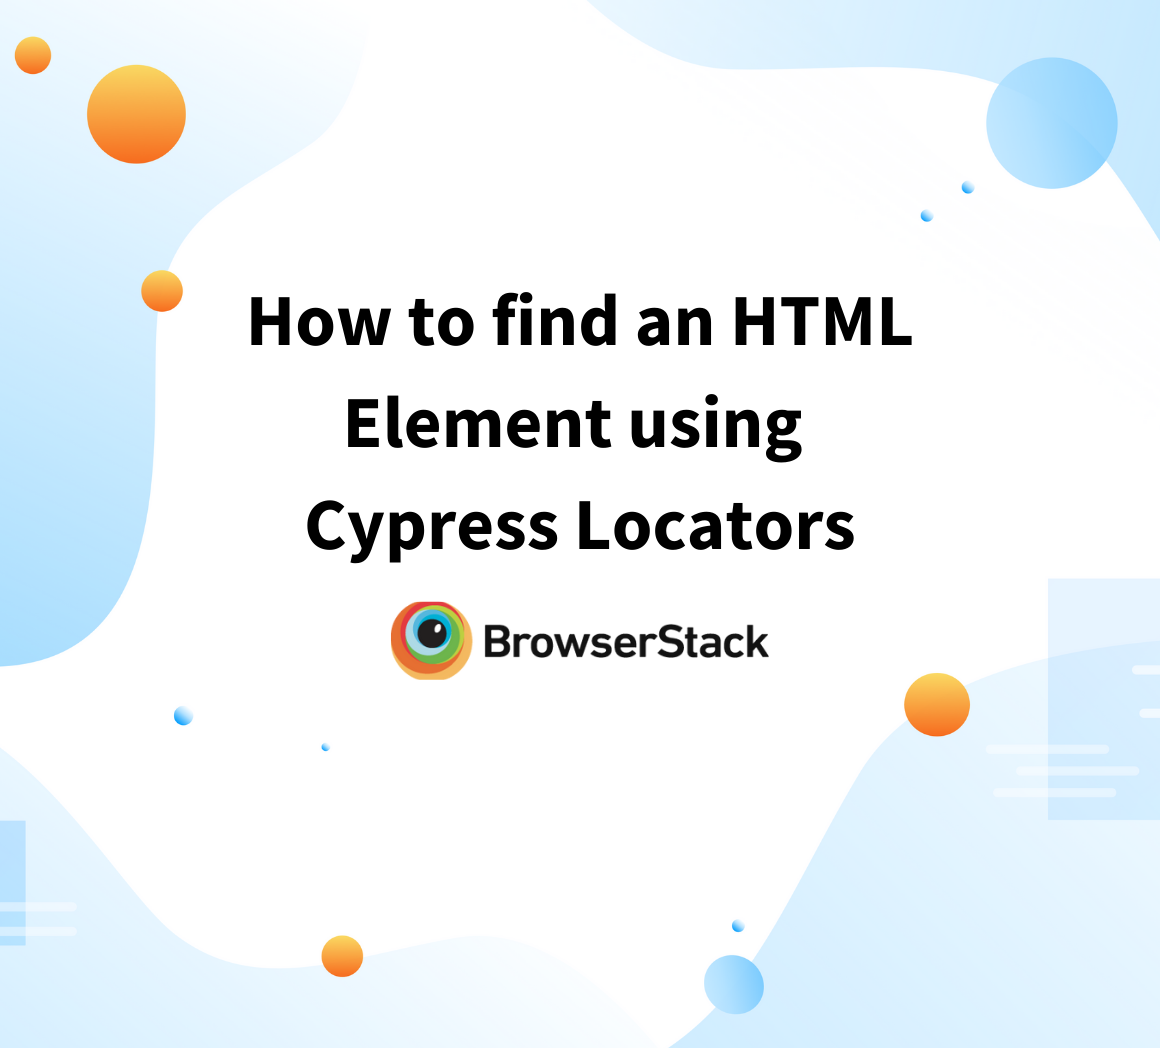 How to find HTML element using Cypress Locators